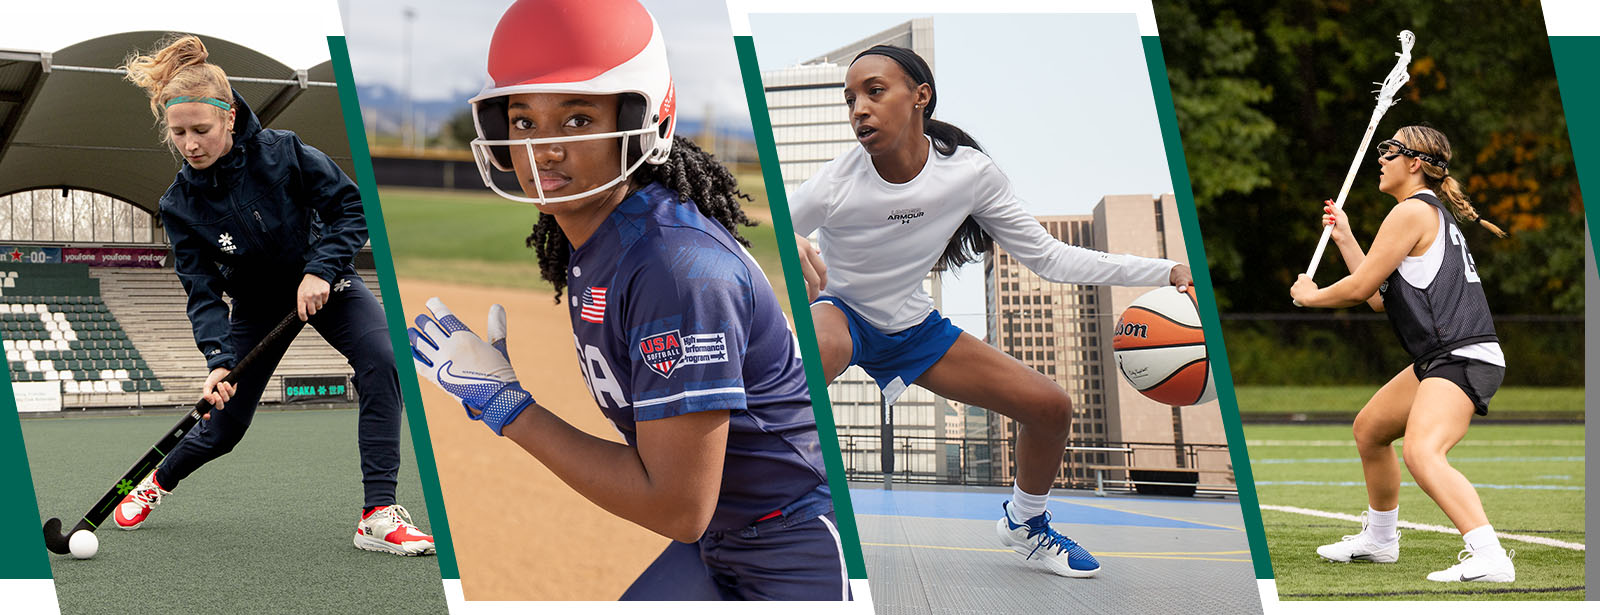 Gear and Apparel for the Female Athlete